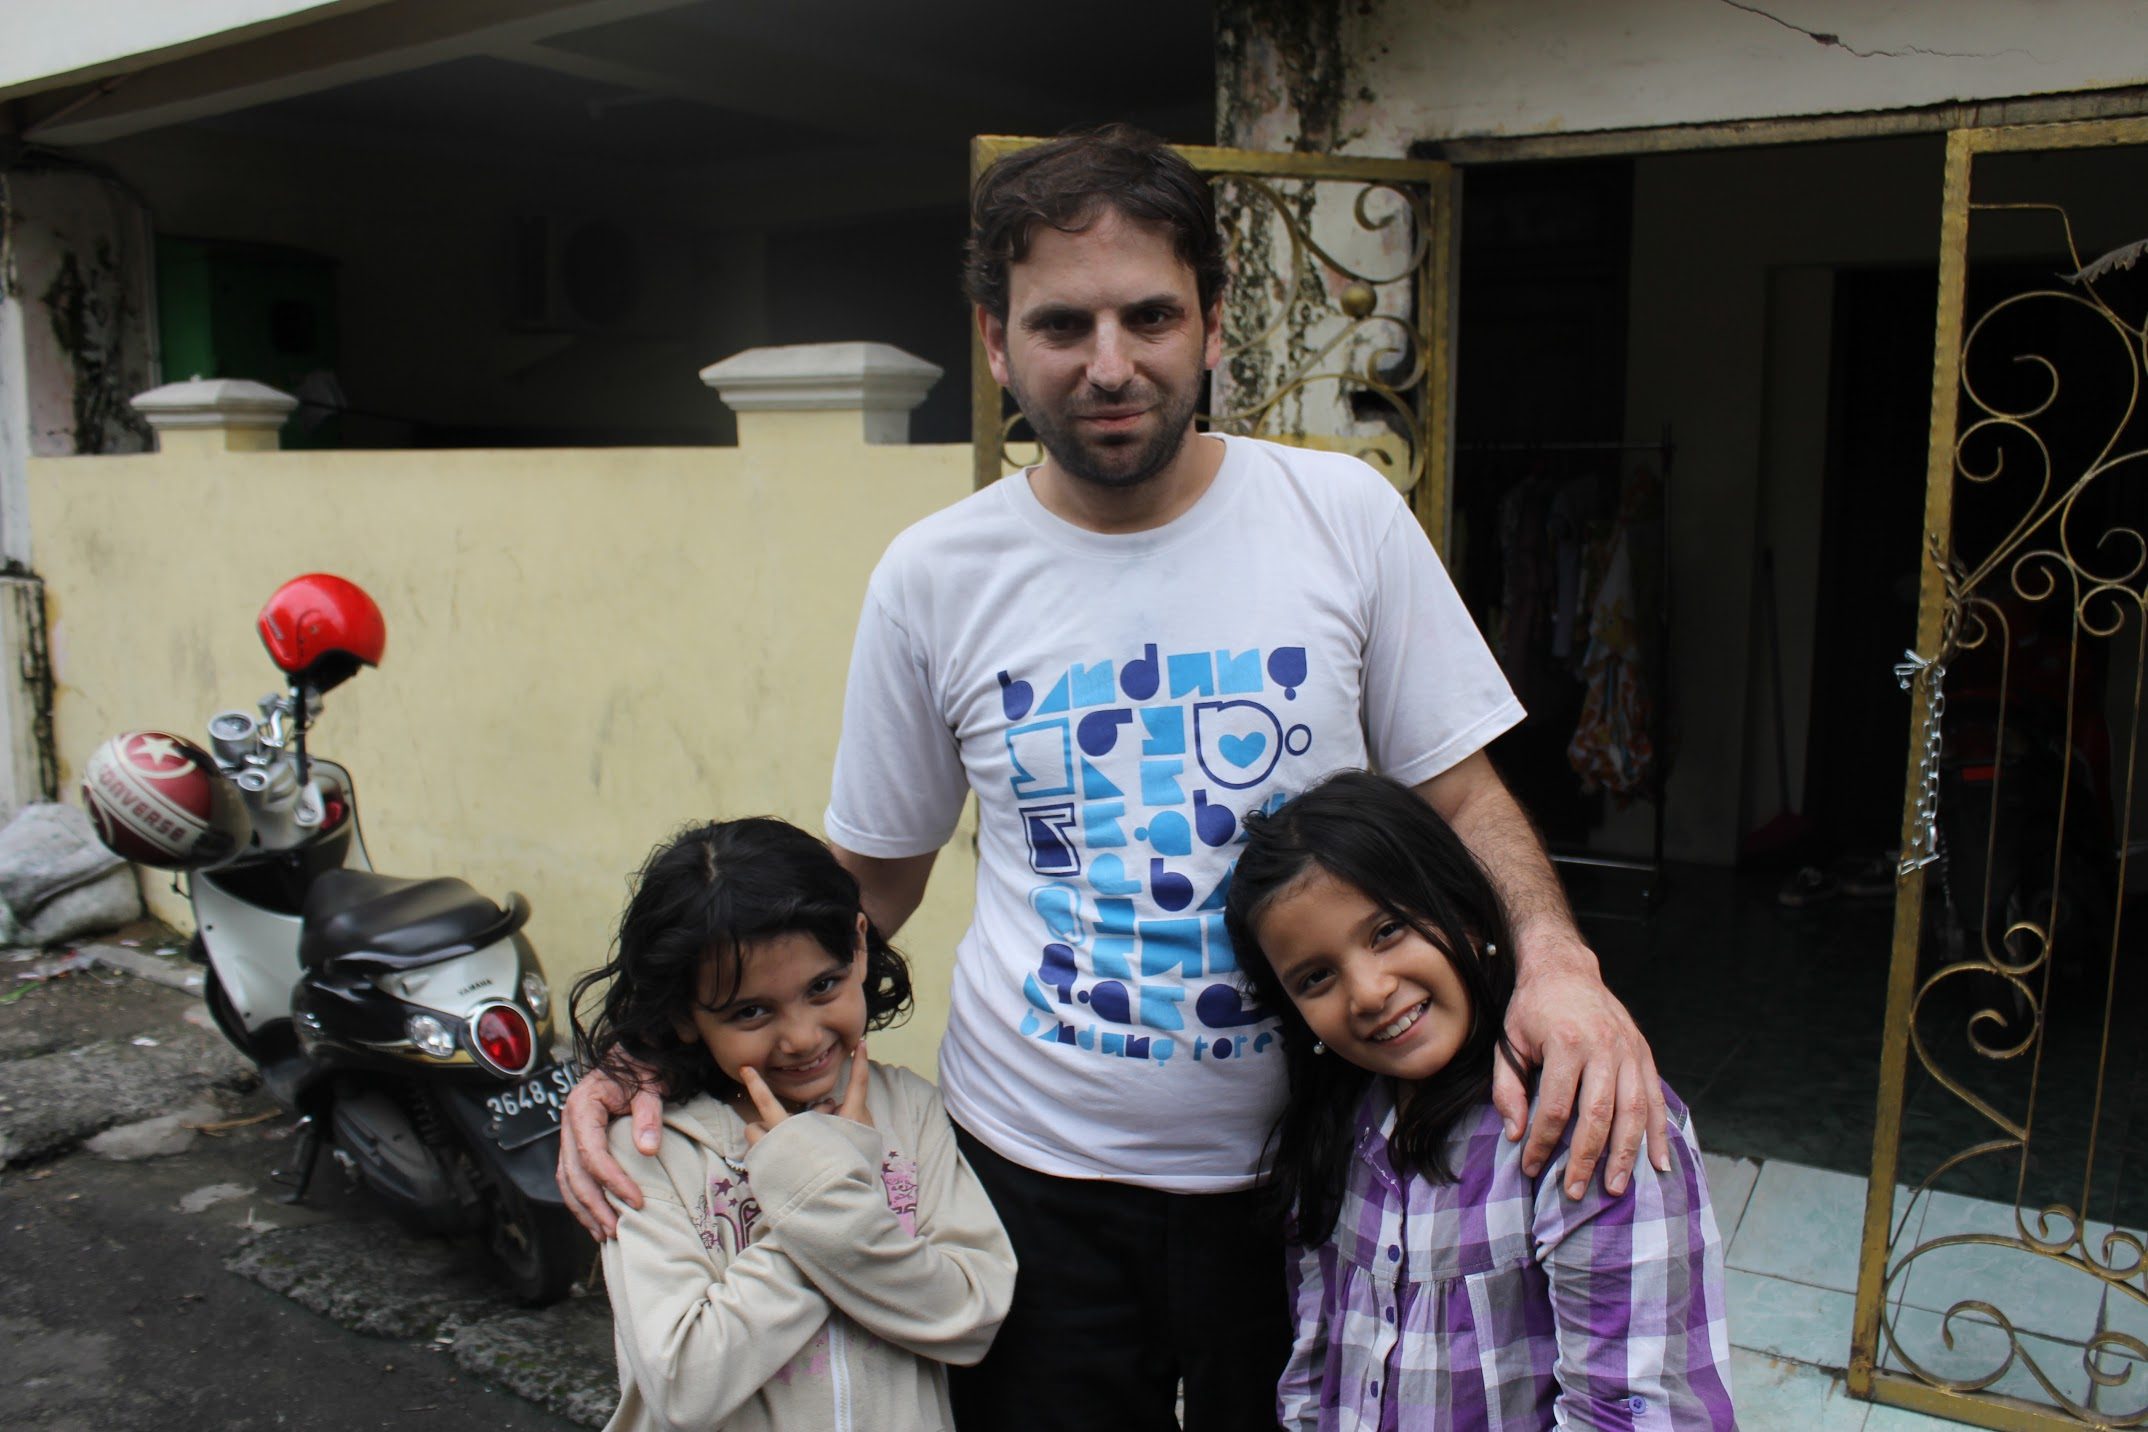 FATHER'S CONCERN. Ahmed says his priority are his two young daughters and giving them a better life. Photo by Han Nguyen/Rappler 